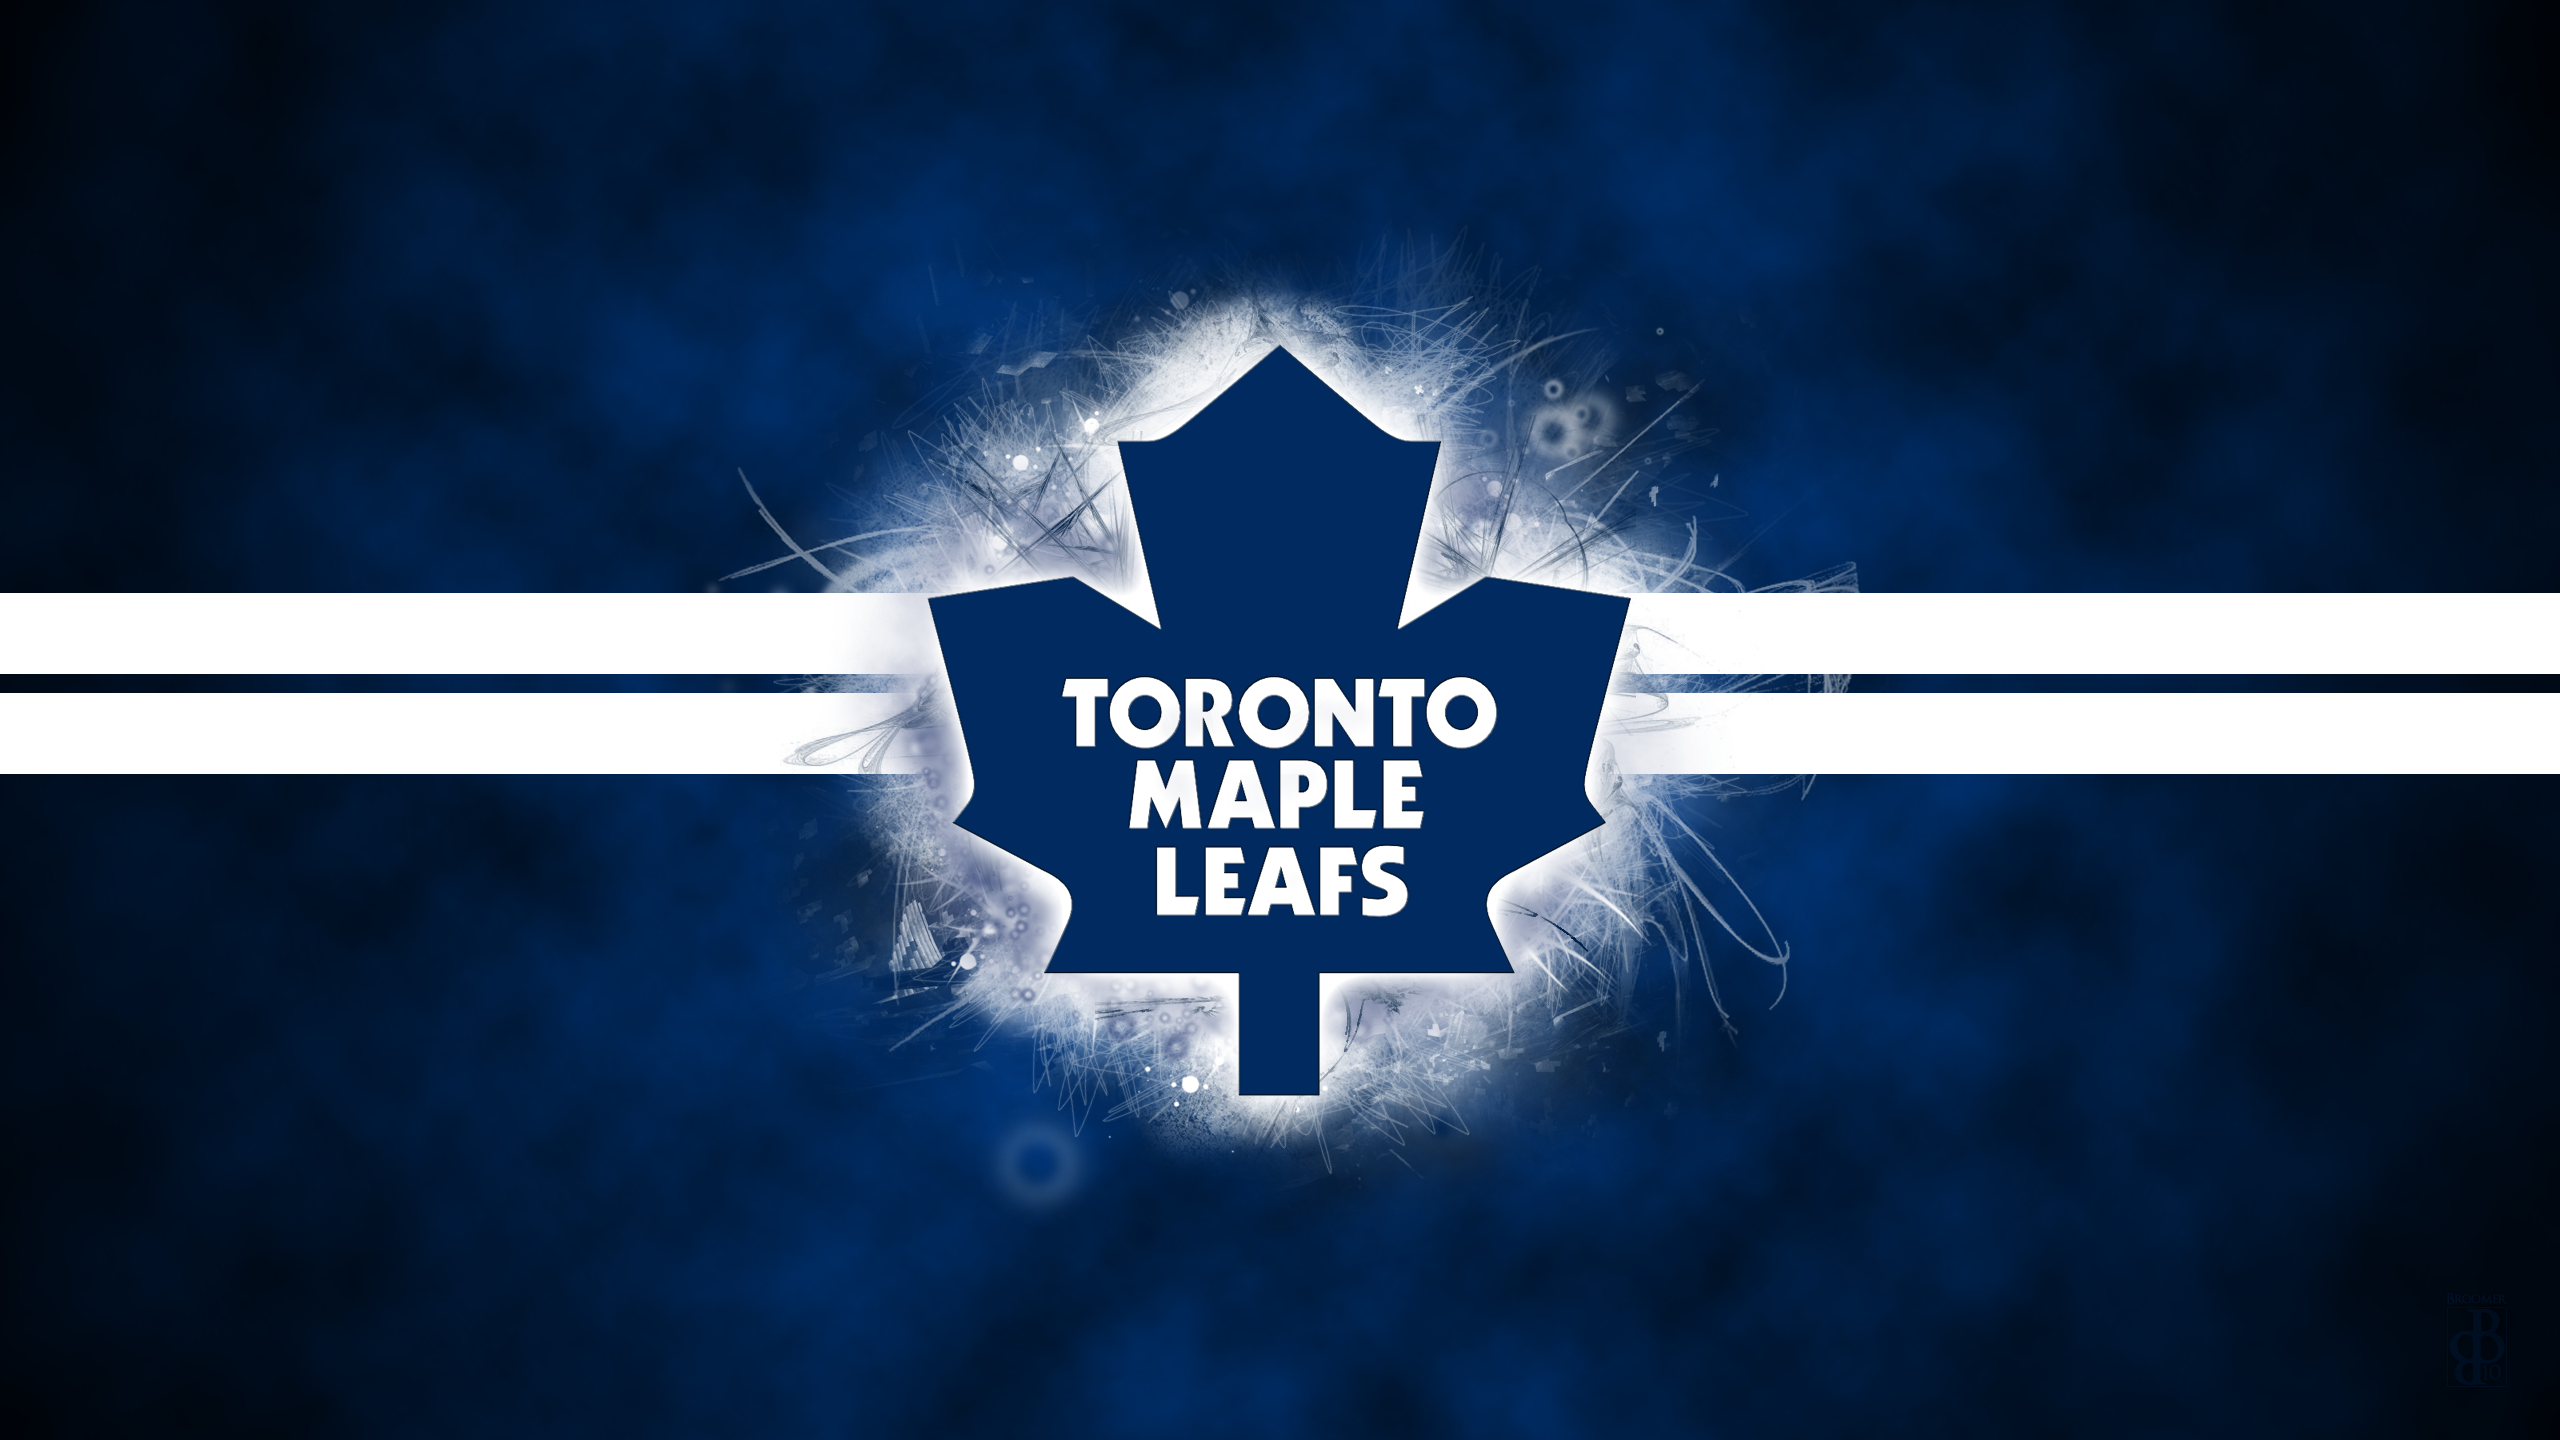 Toronto Maple Leafs Large By Bbboz